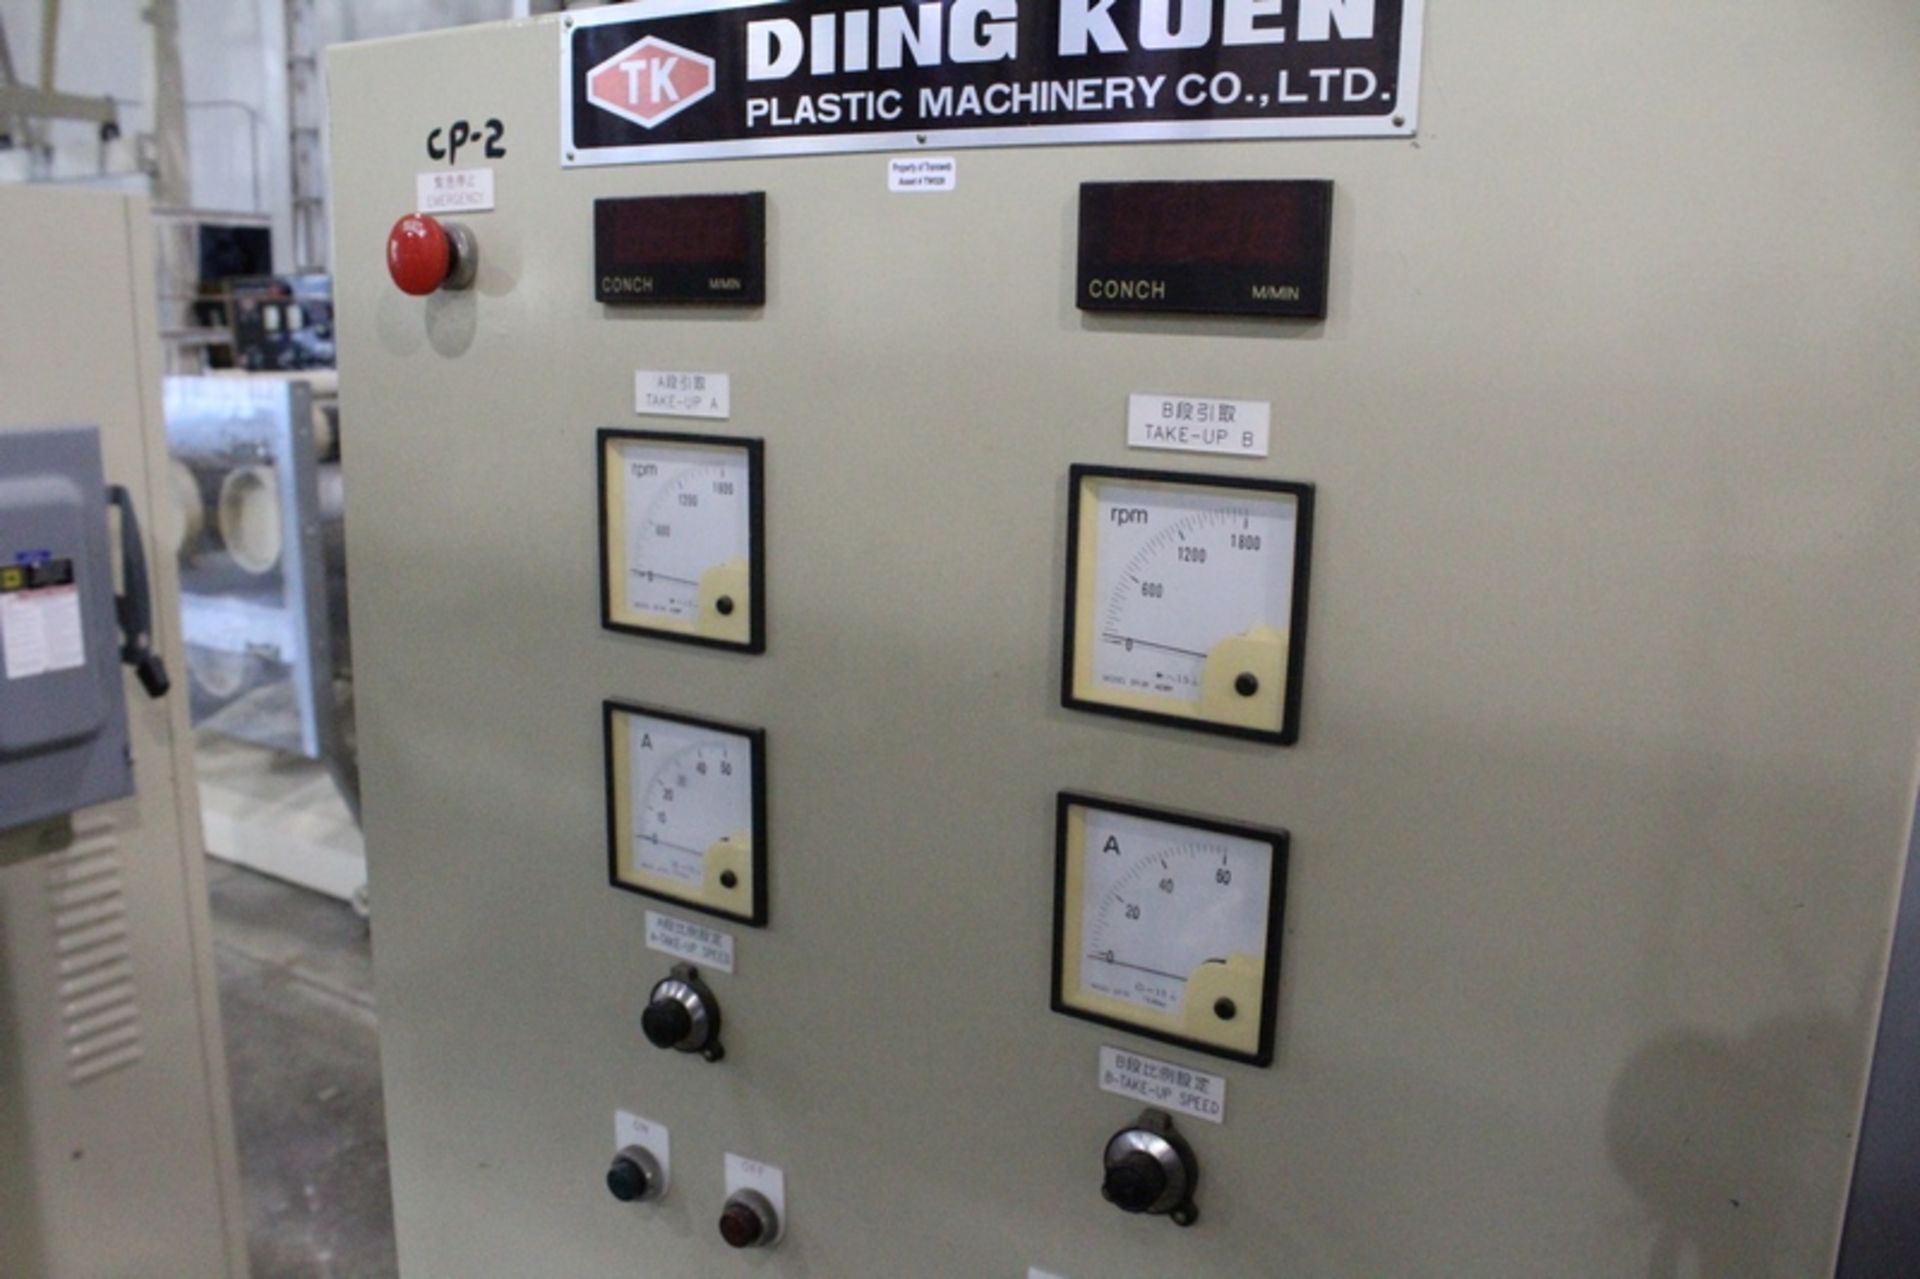 Fiber Making Line No. 1 Consisting of: 24” 3 Station Payoff Stand, 2 - Diing Kuen Model TK-FY30 3 - Image 31 of 40